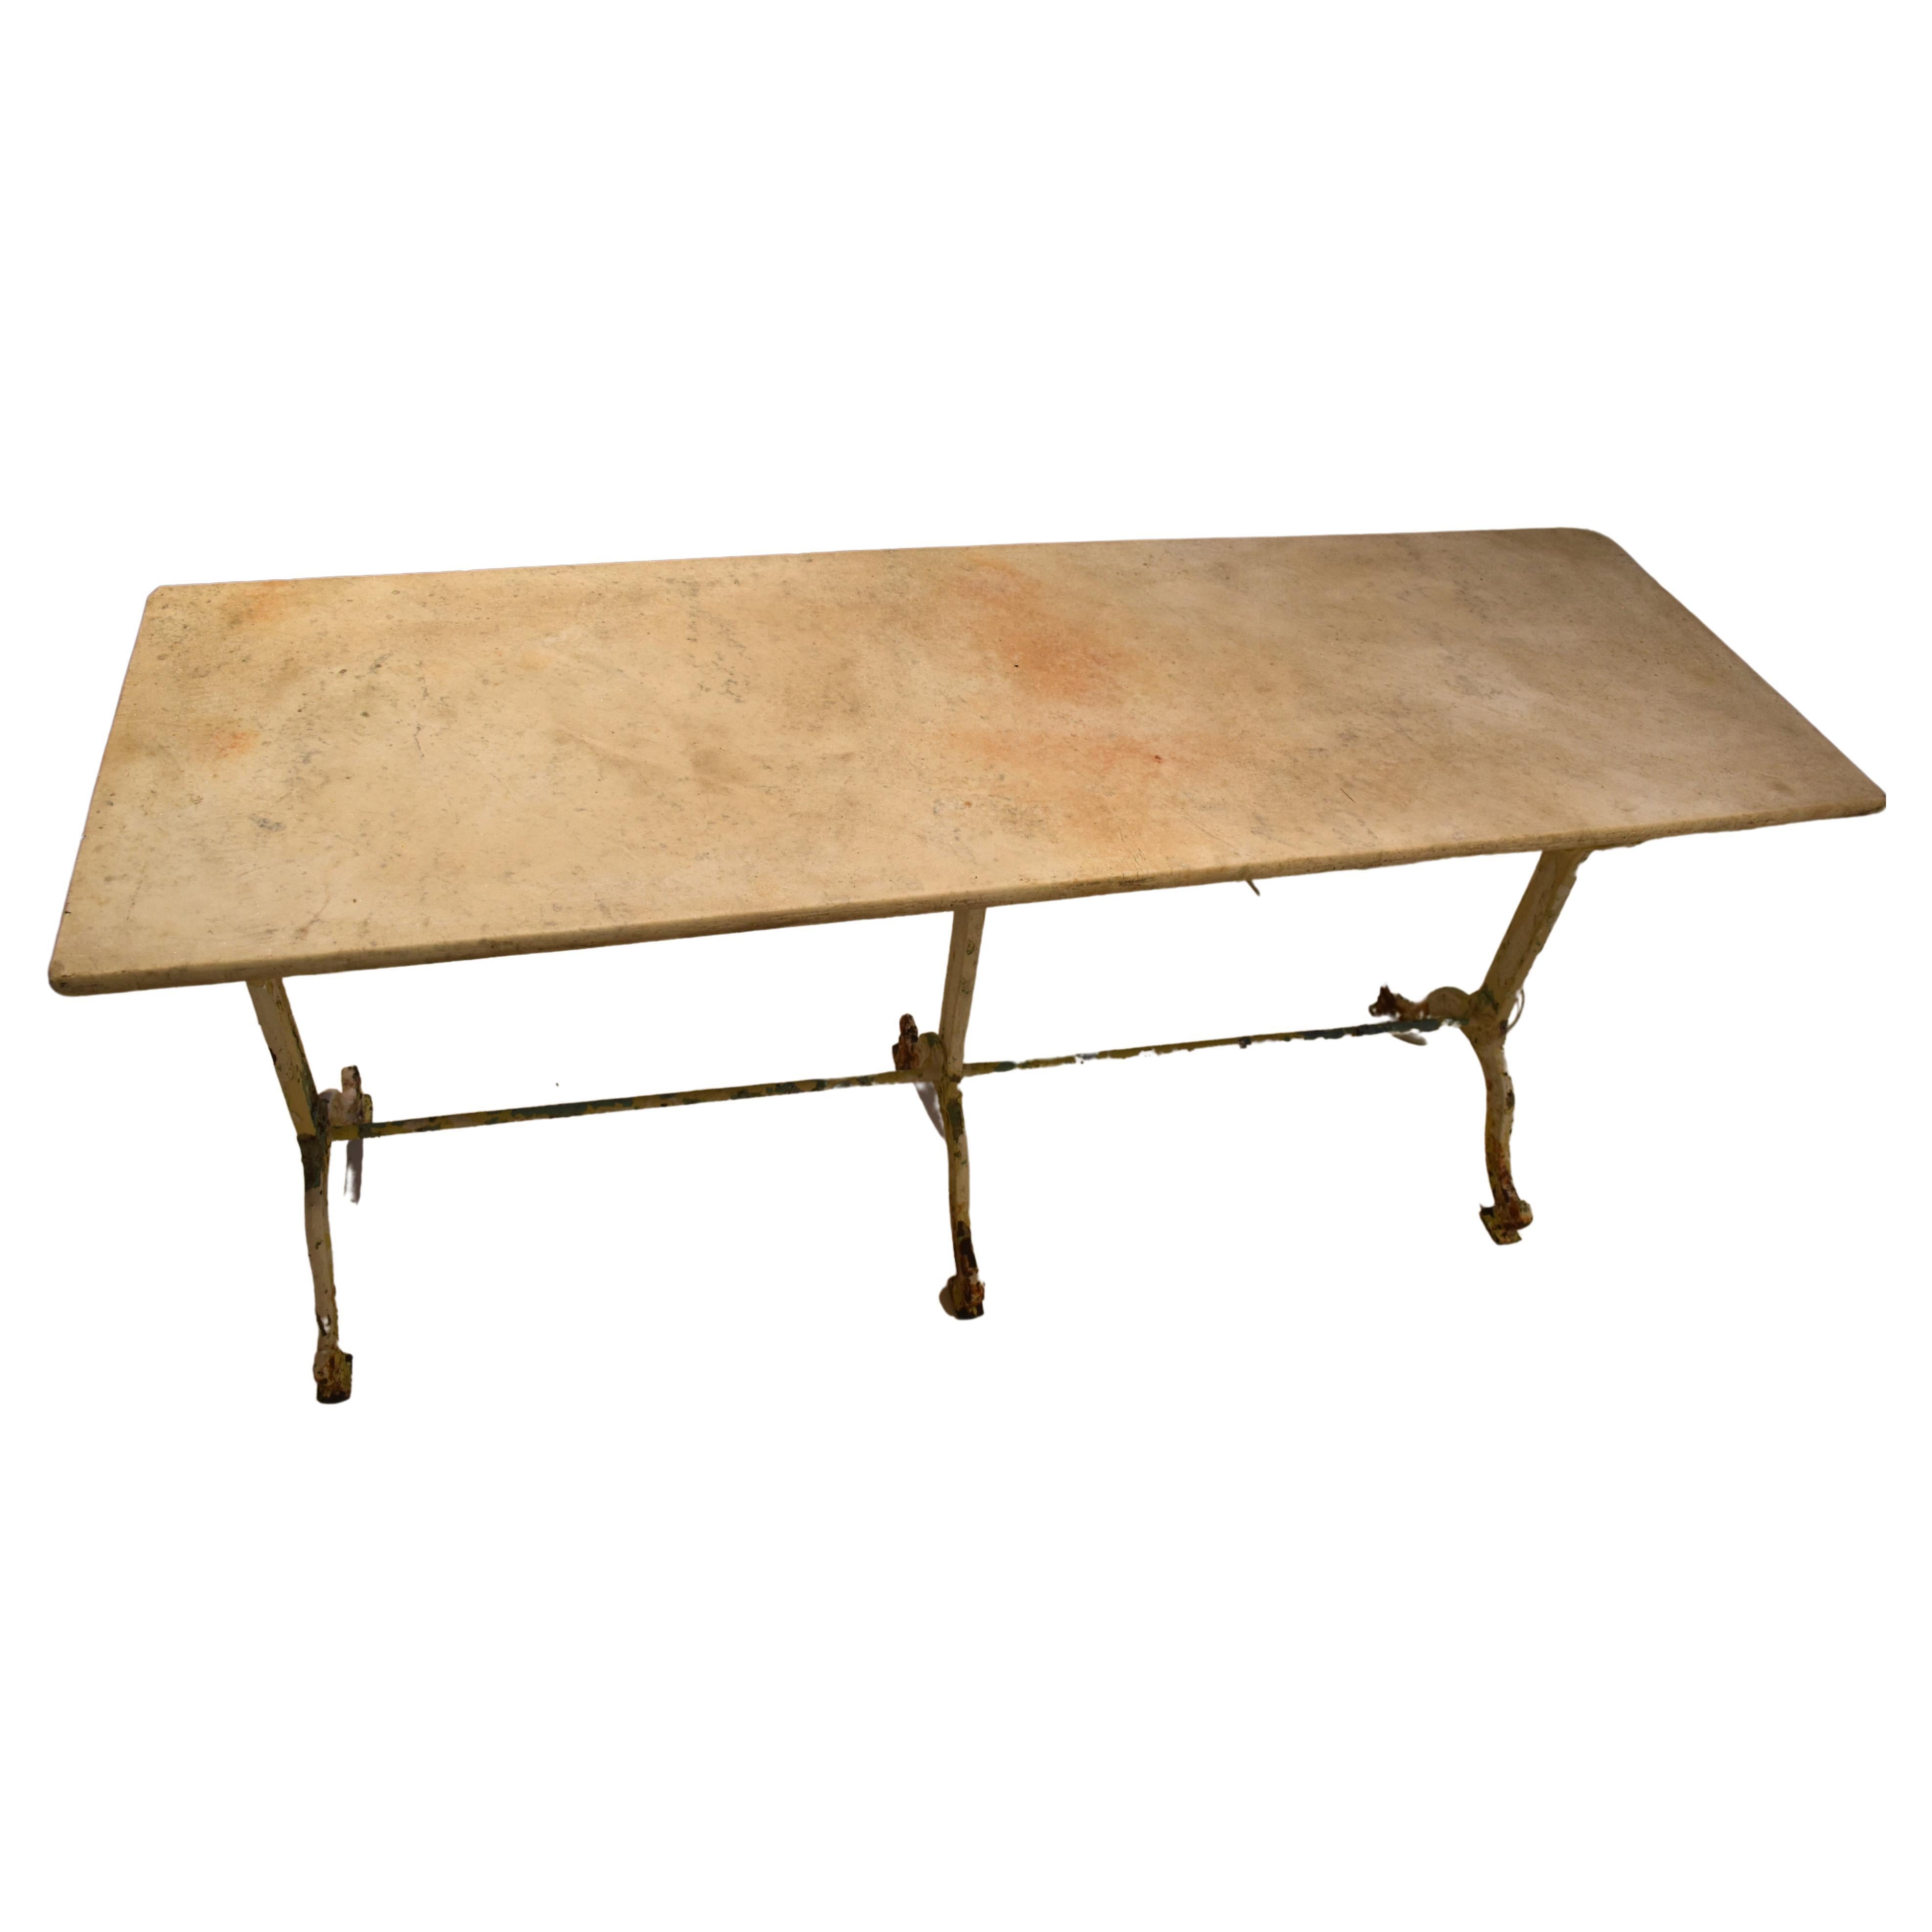 Bistro Table with White Marble Top, 19th Century, French White Iron